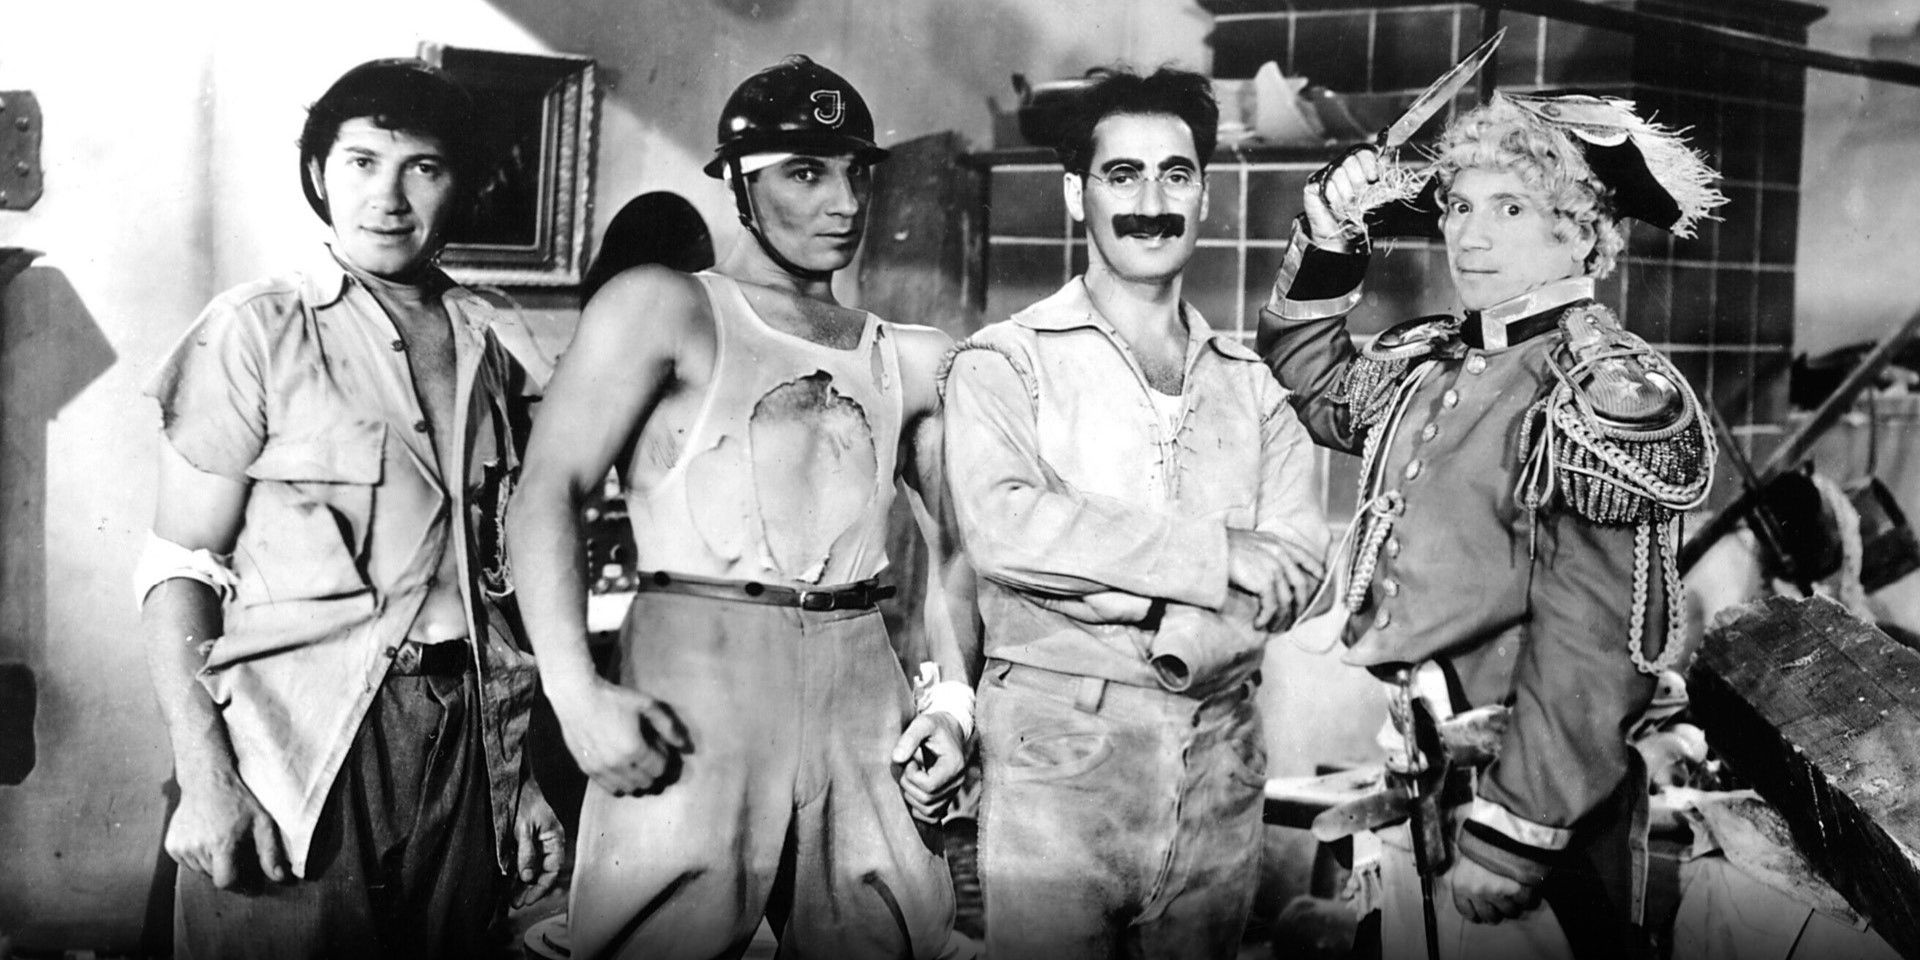 Chico, Zeppo, Groucho, and Harpo strike a pose in Duck Soup